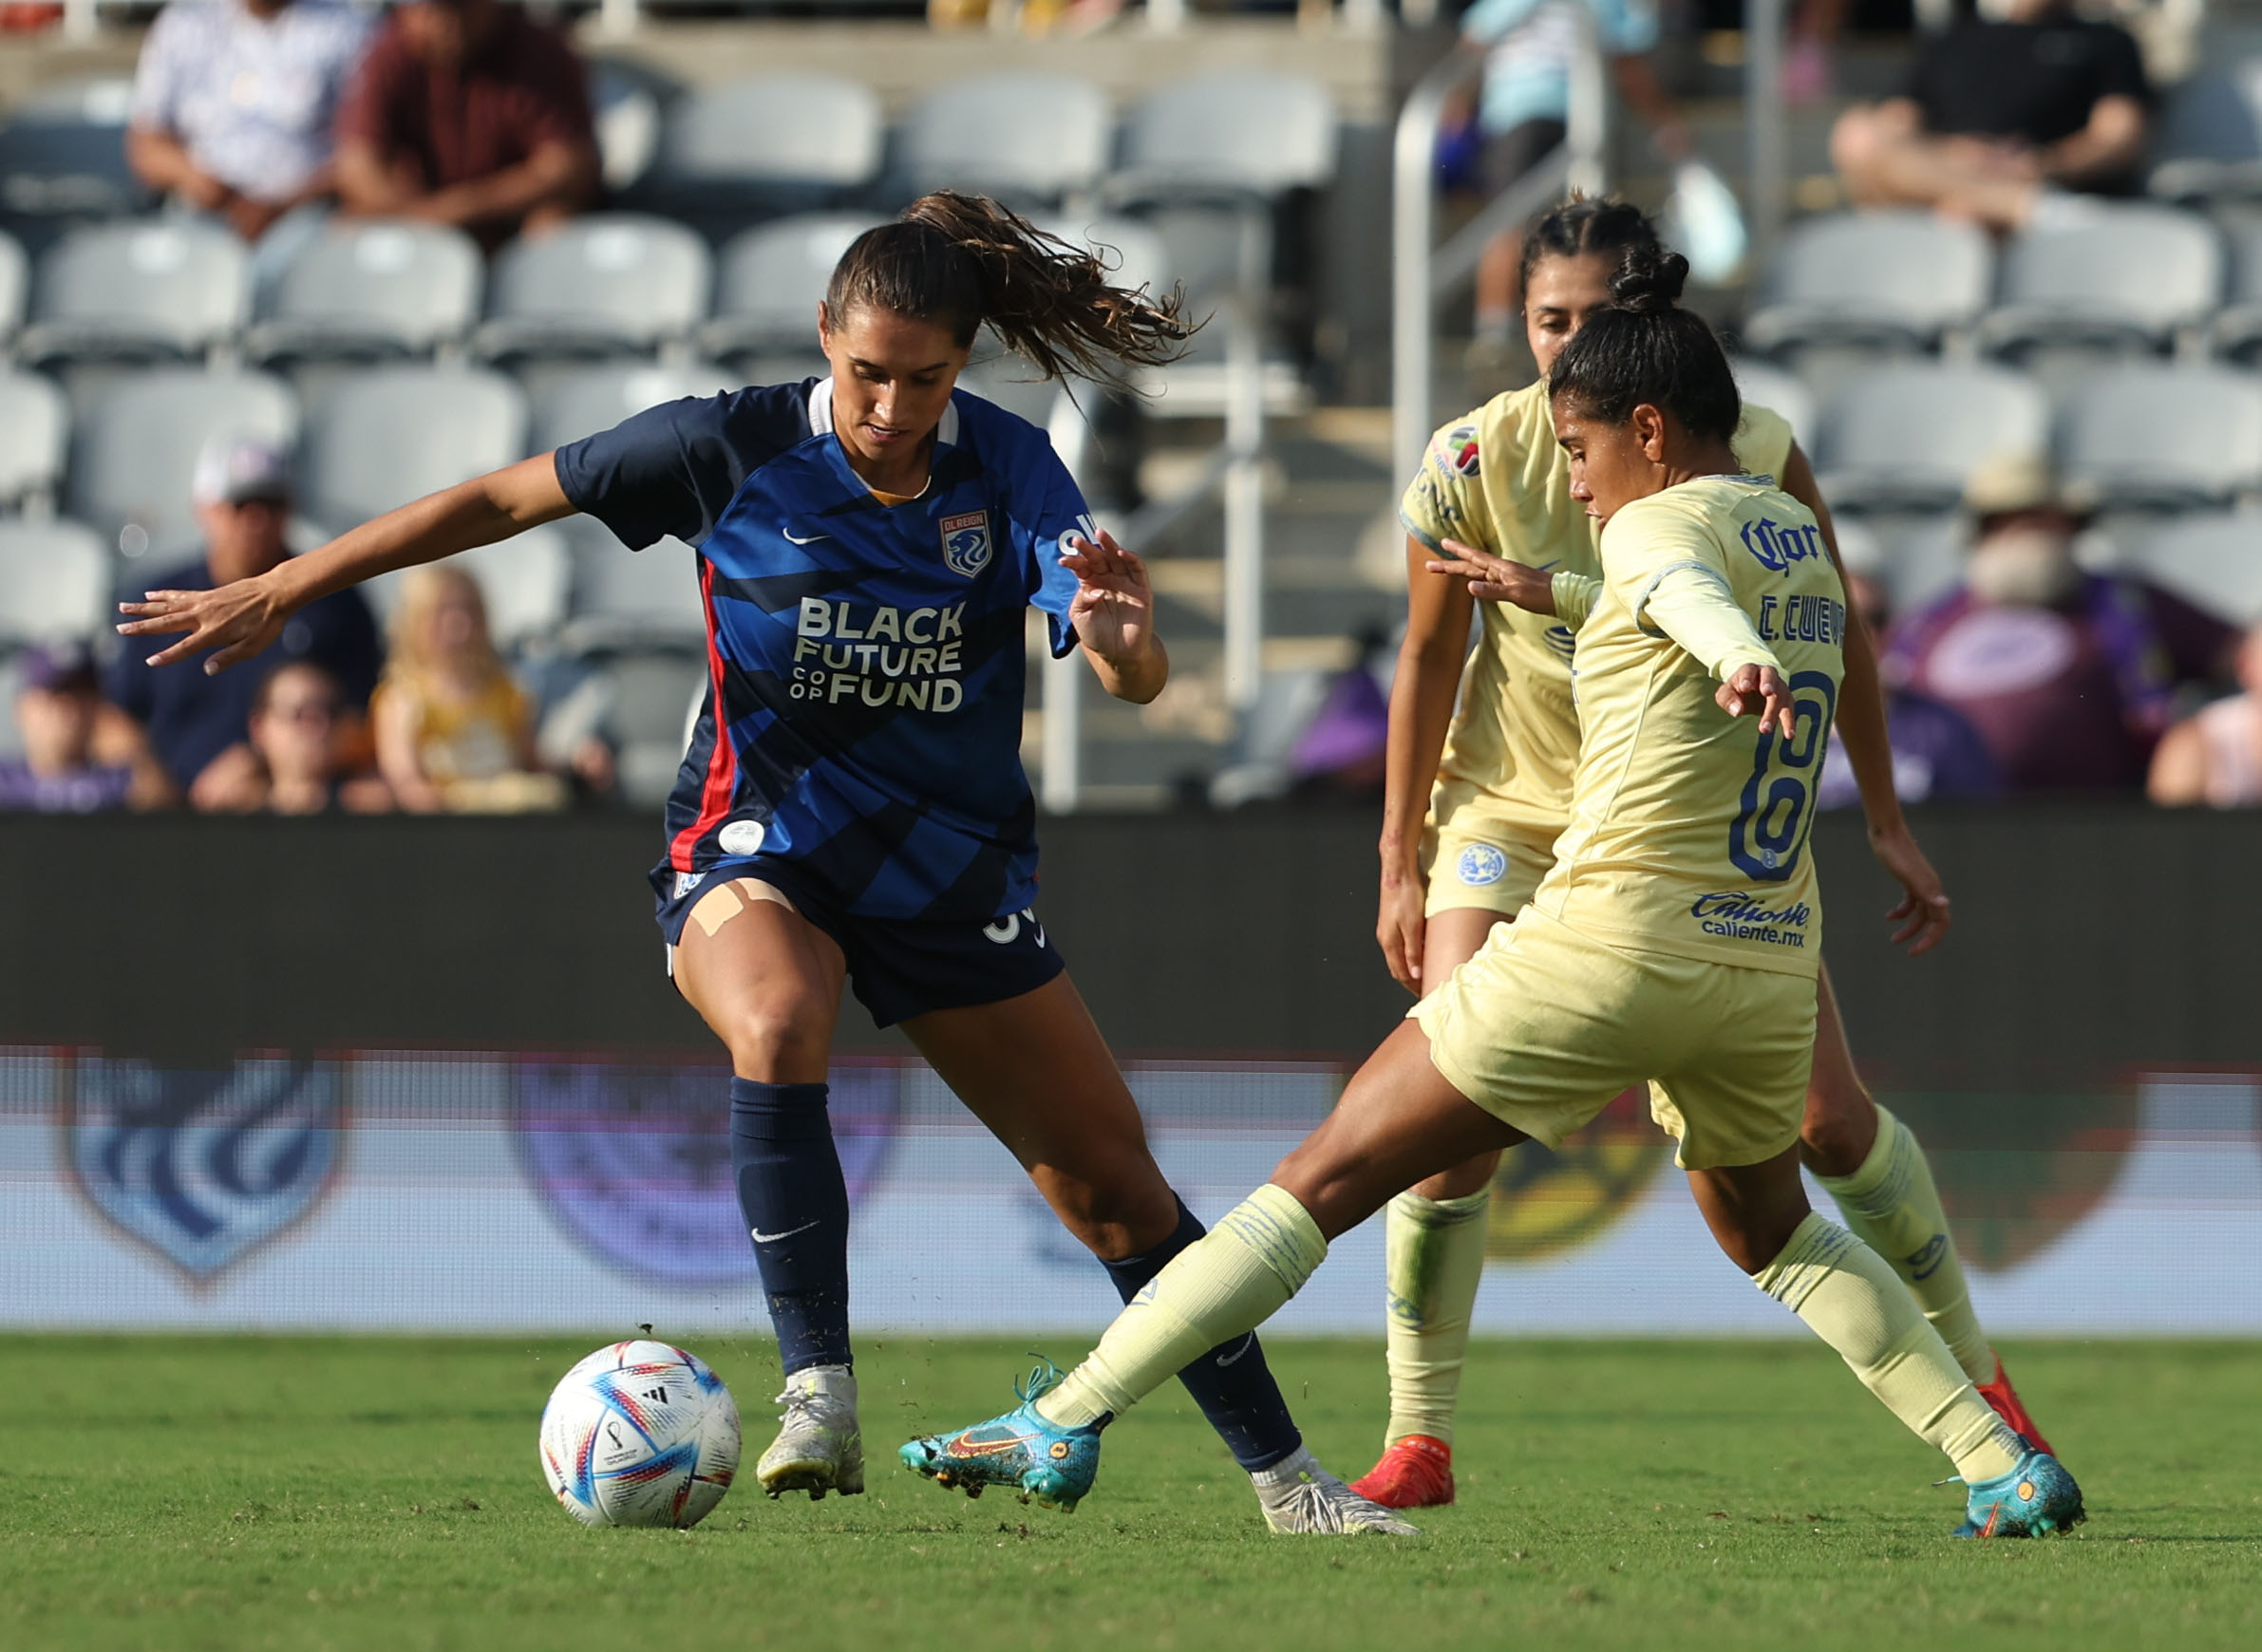 Soccer: The Women’s Cup-OL Reign at Club America